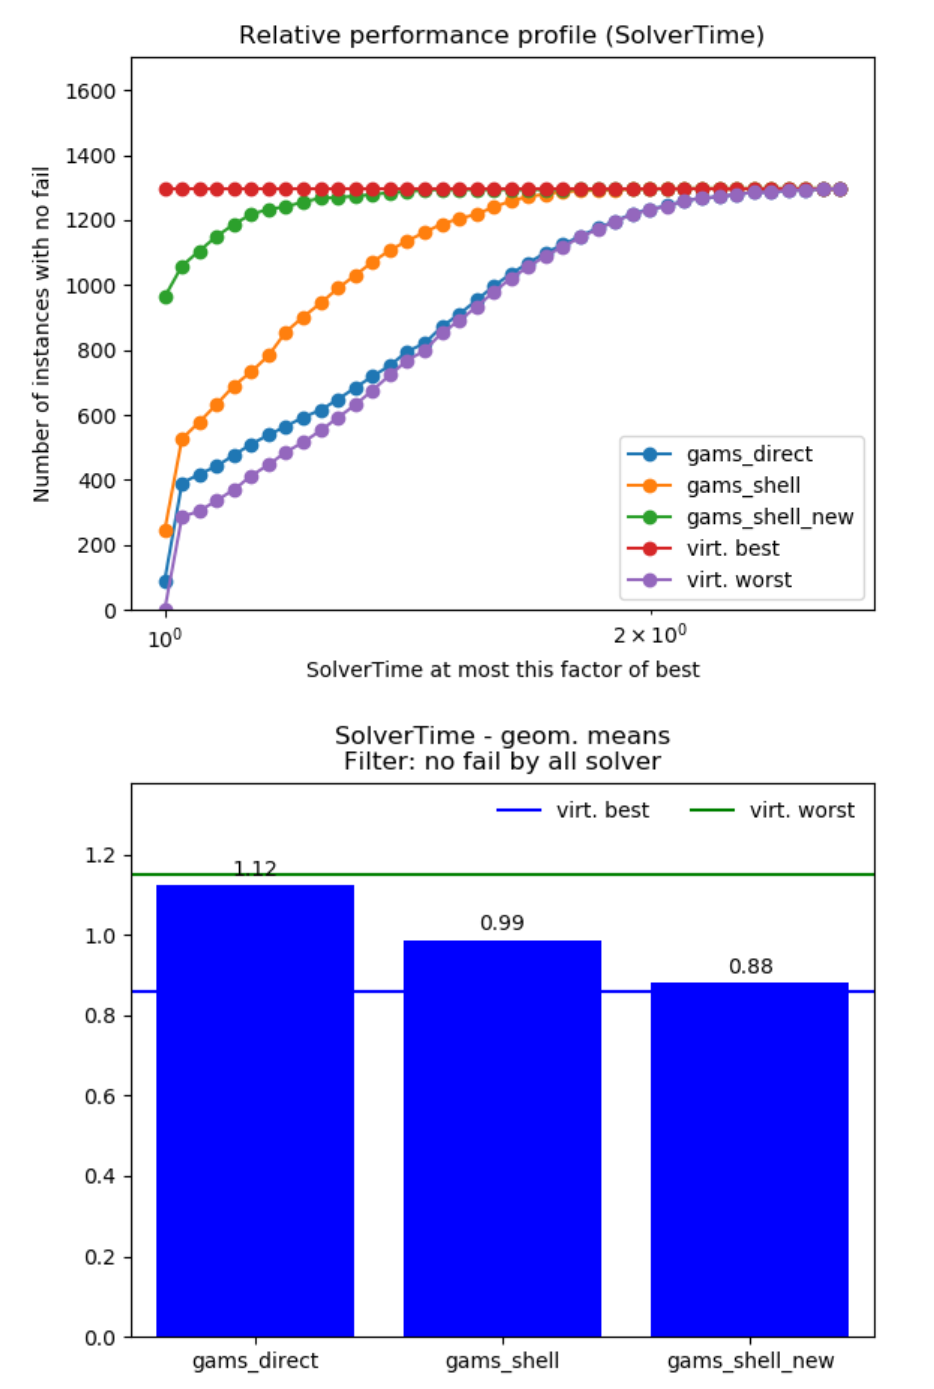 Performance improvement on MINLPlib.
Comparison of the new GDX based link (gams_shell_new) with the old put-based link (gams_shell) and the direct call of gams via the python API (gams_direct). Theoretical best and worst case scenarios are included as virt. best and virt. worst, respectively.